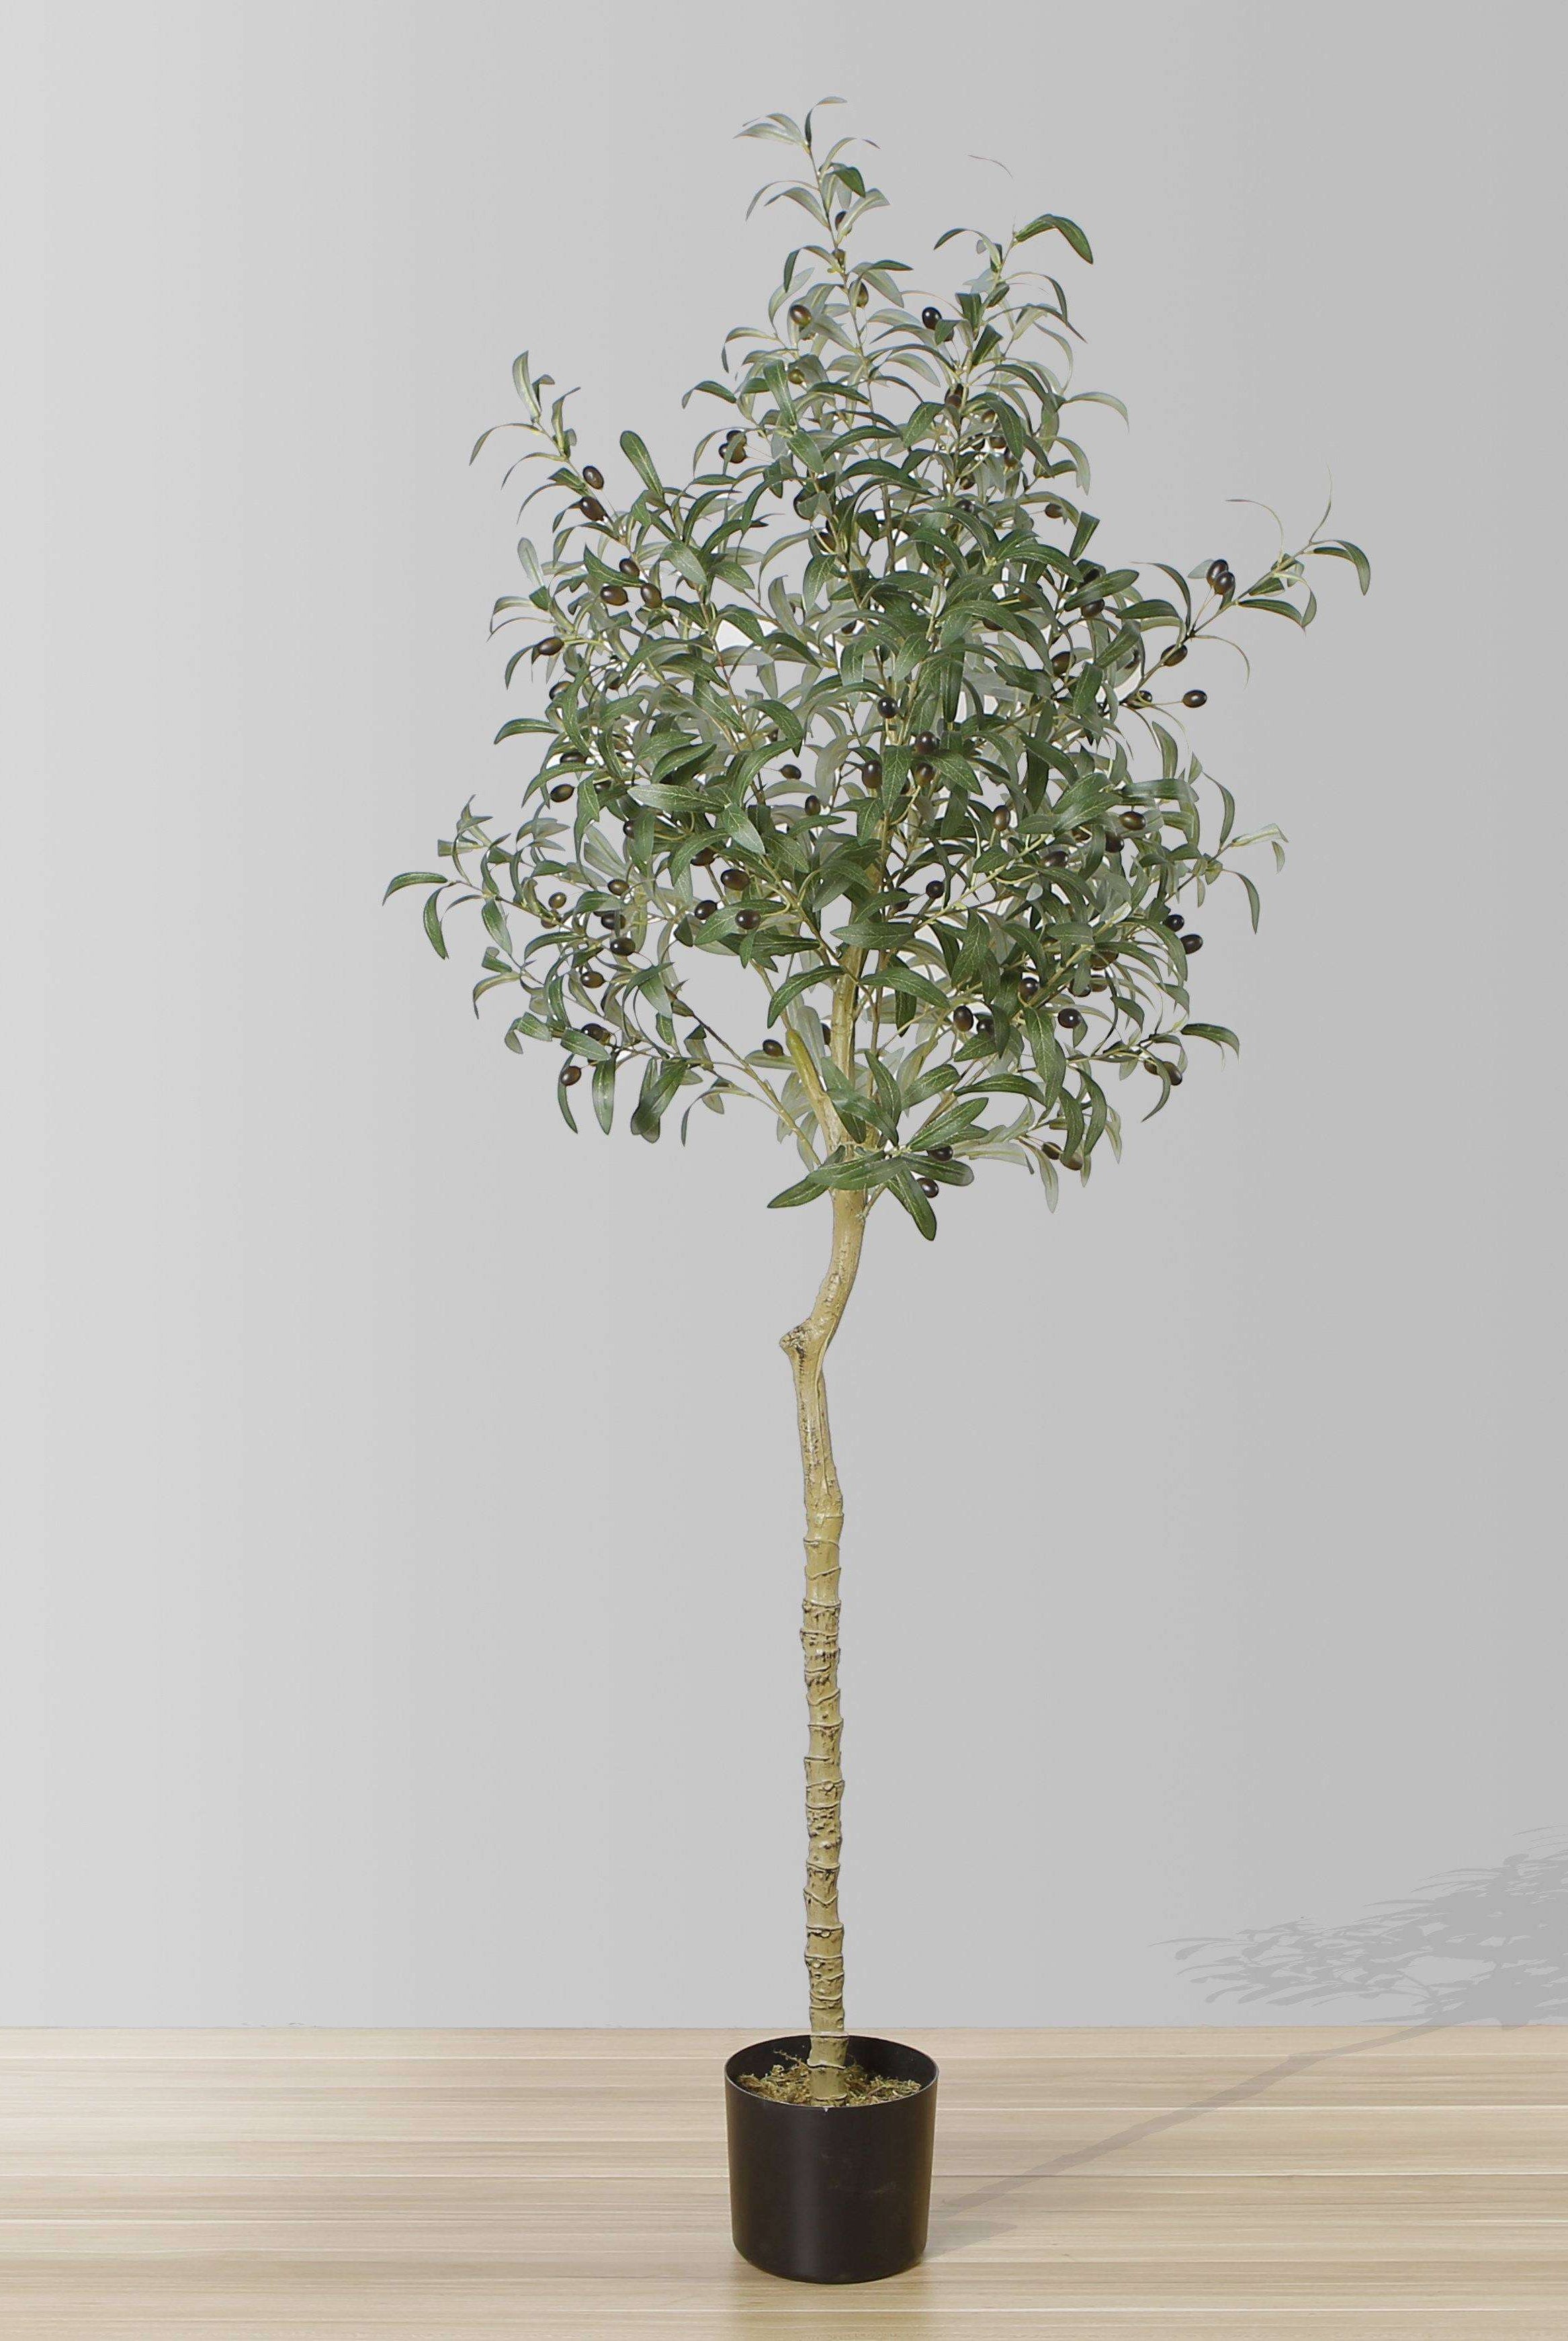 OLI ARTIFICIAL OLIVE TREE POTTED PLANT (Multiple Sizes) ArtiPlanto